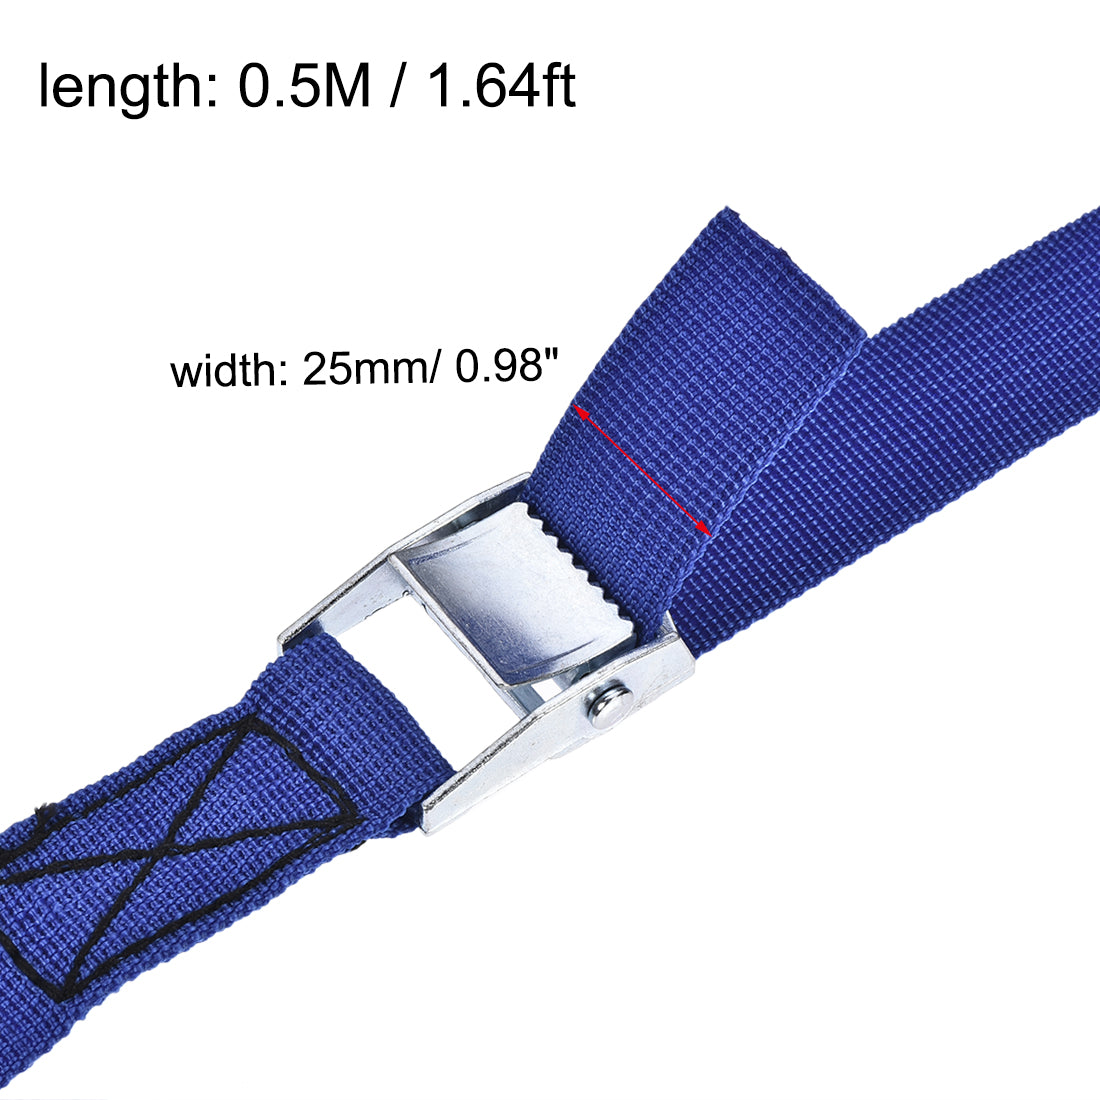 uxcell Uxcell Lashing Strap 0.5M x 25mm Cargo Tie Down Straps Buckle Working Load up to 80kg Blue 2pcs